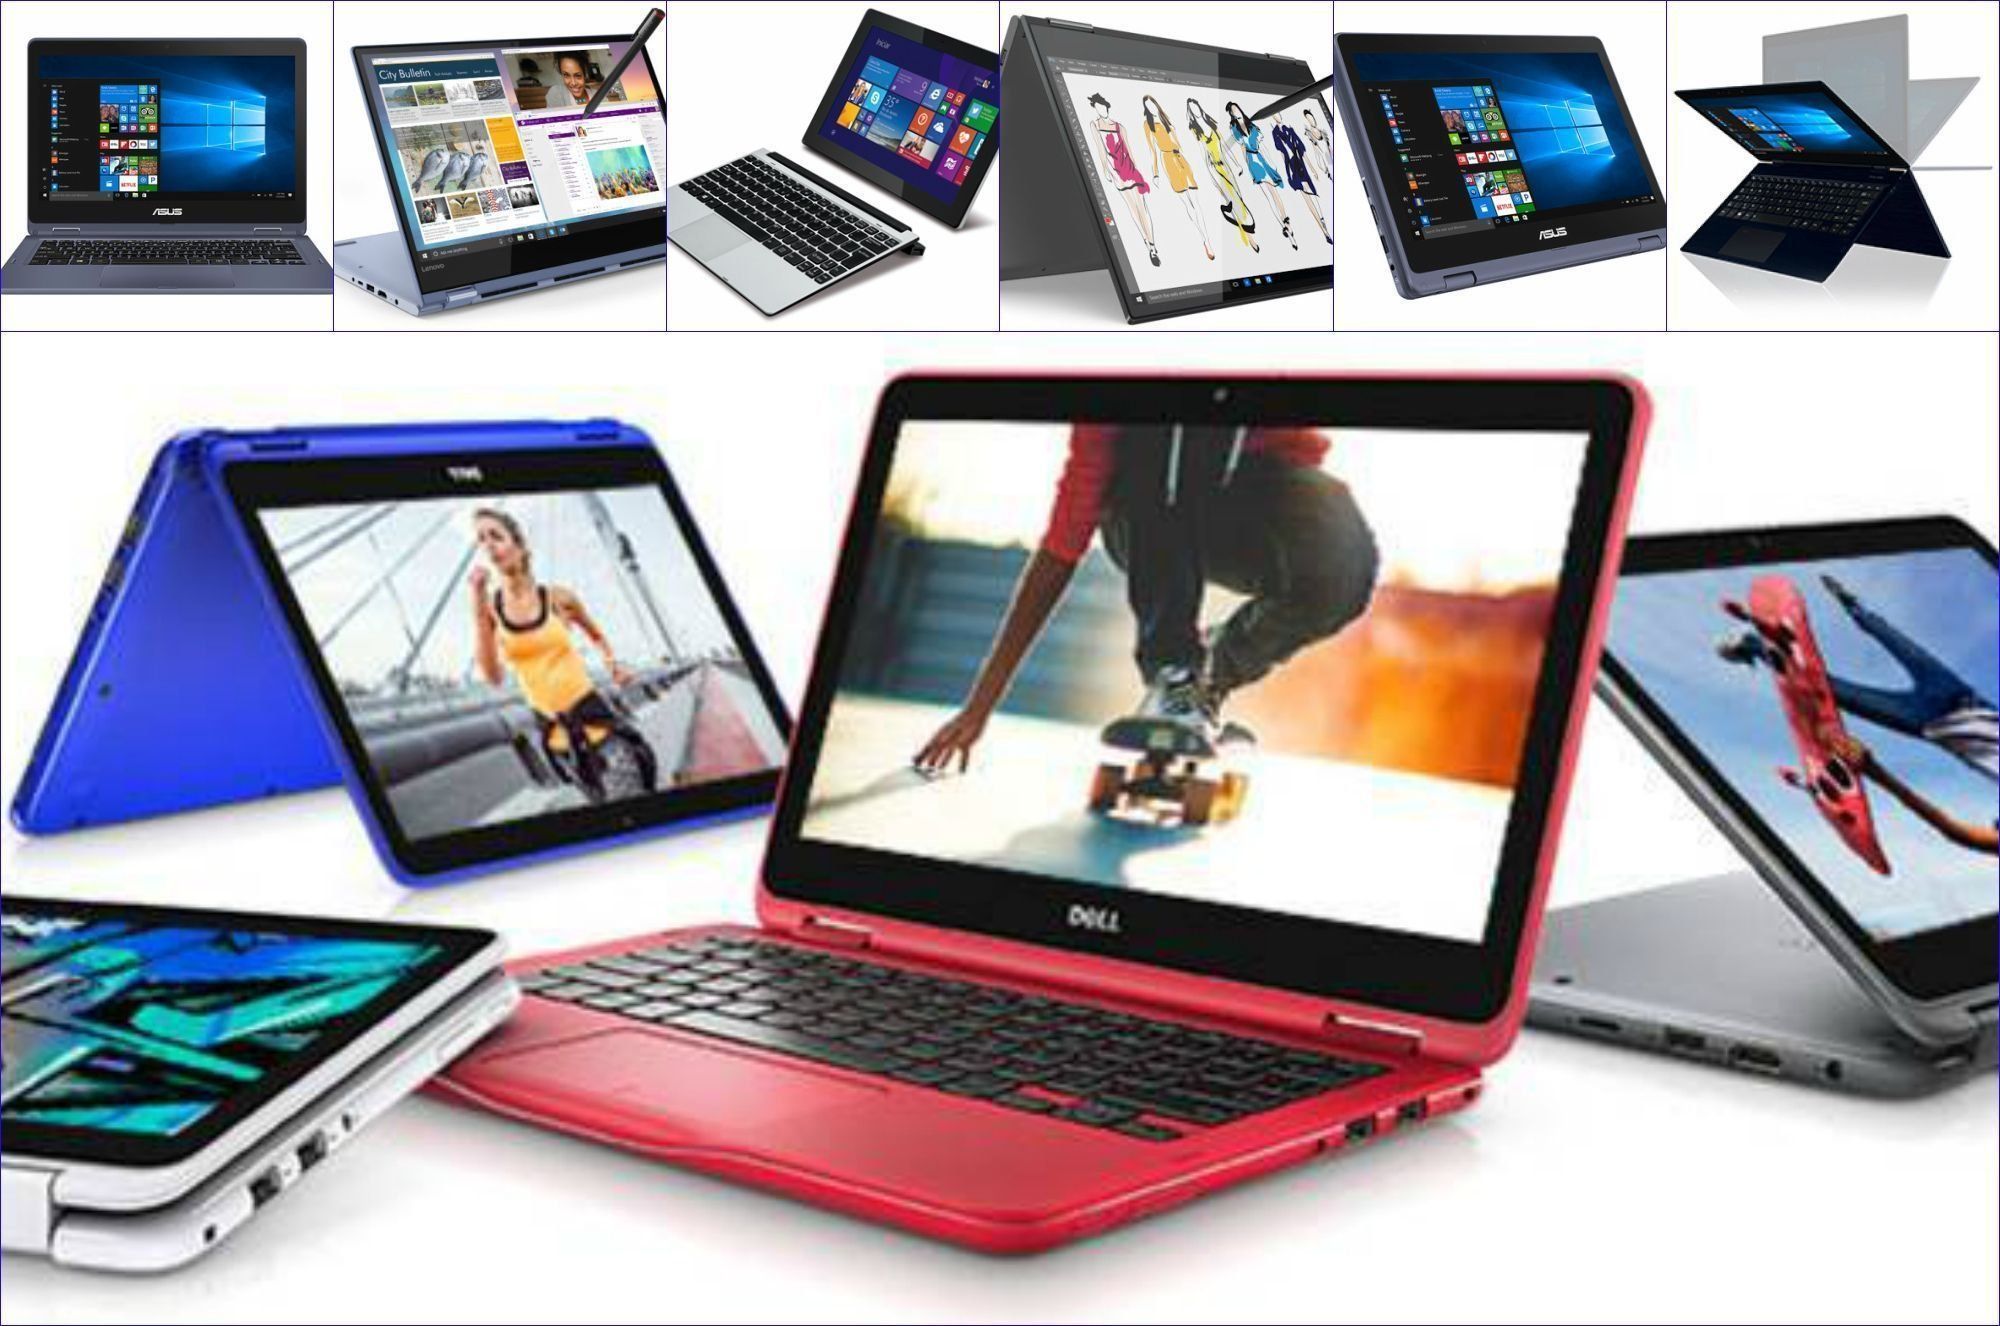 Ranking of the best 11-11.9 inch laptops in 2020